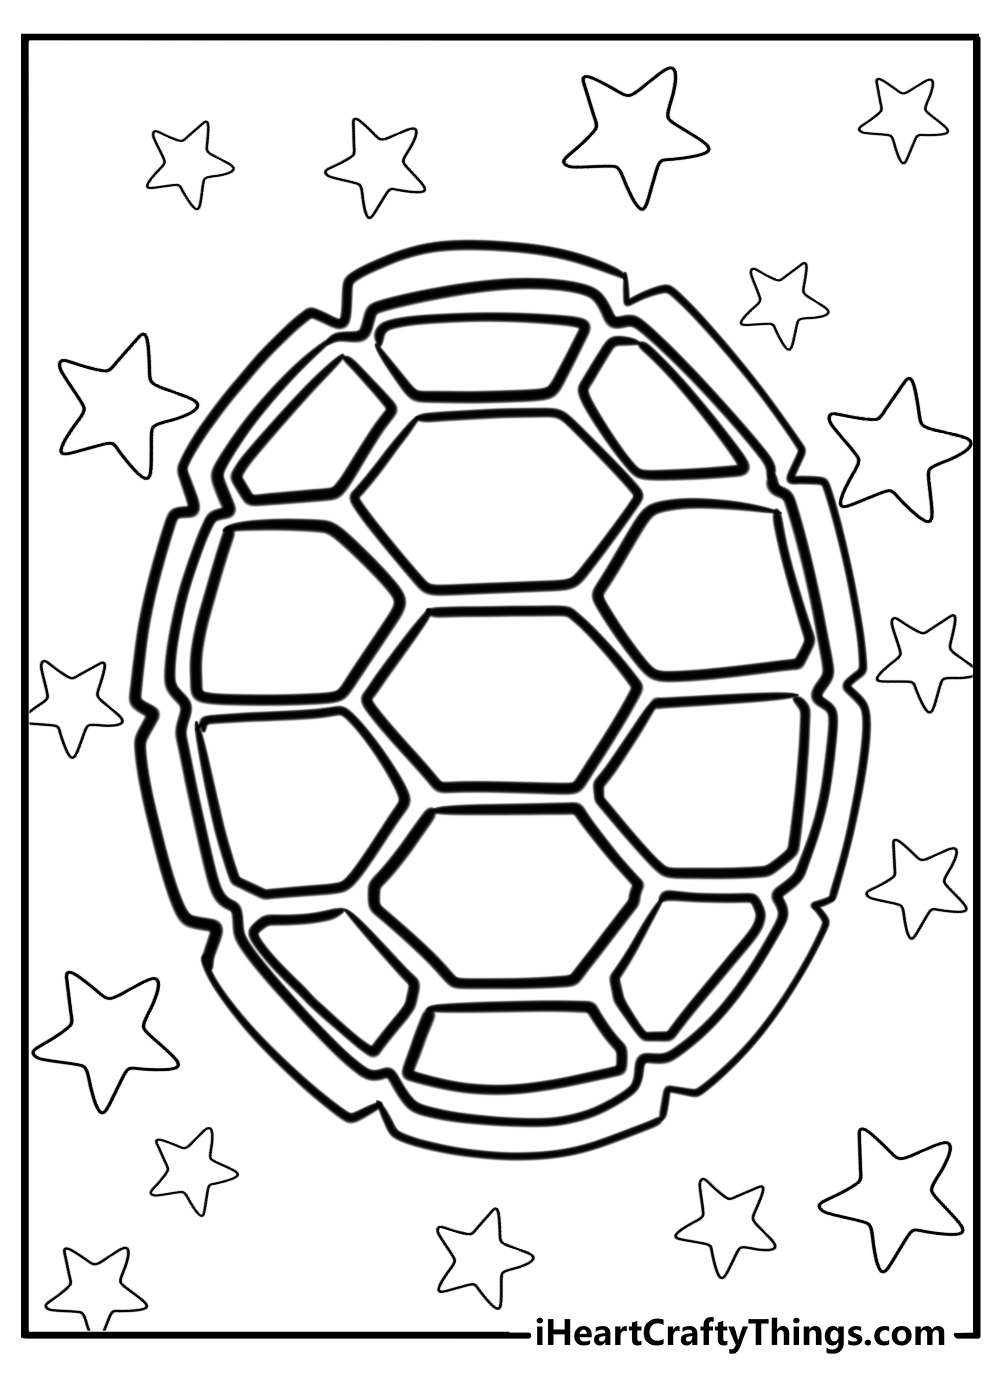 Top down view of turtle shell to color